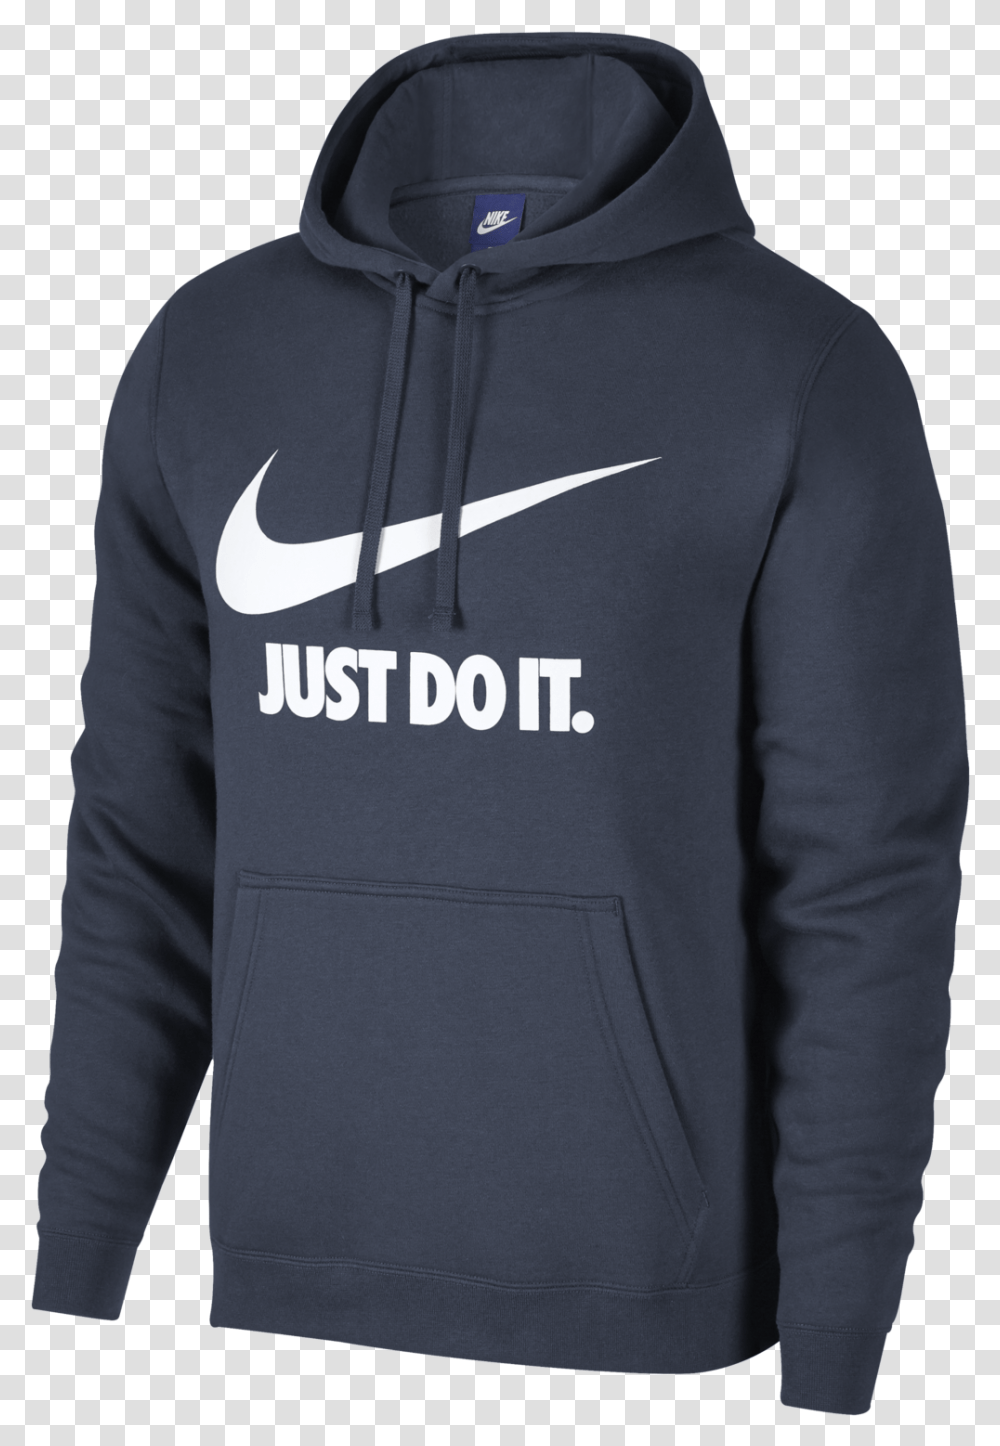 Nike Hoodies For Sale In South Africa, Apparel, Sweatshirt, Sweater Transparent Png